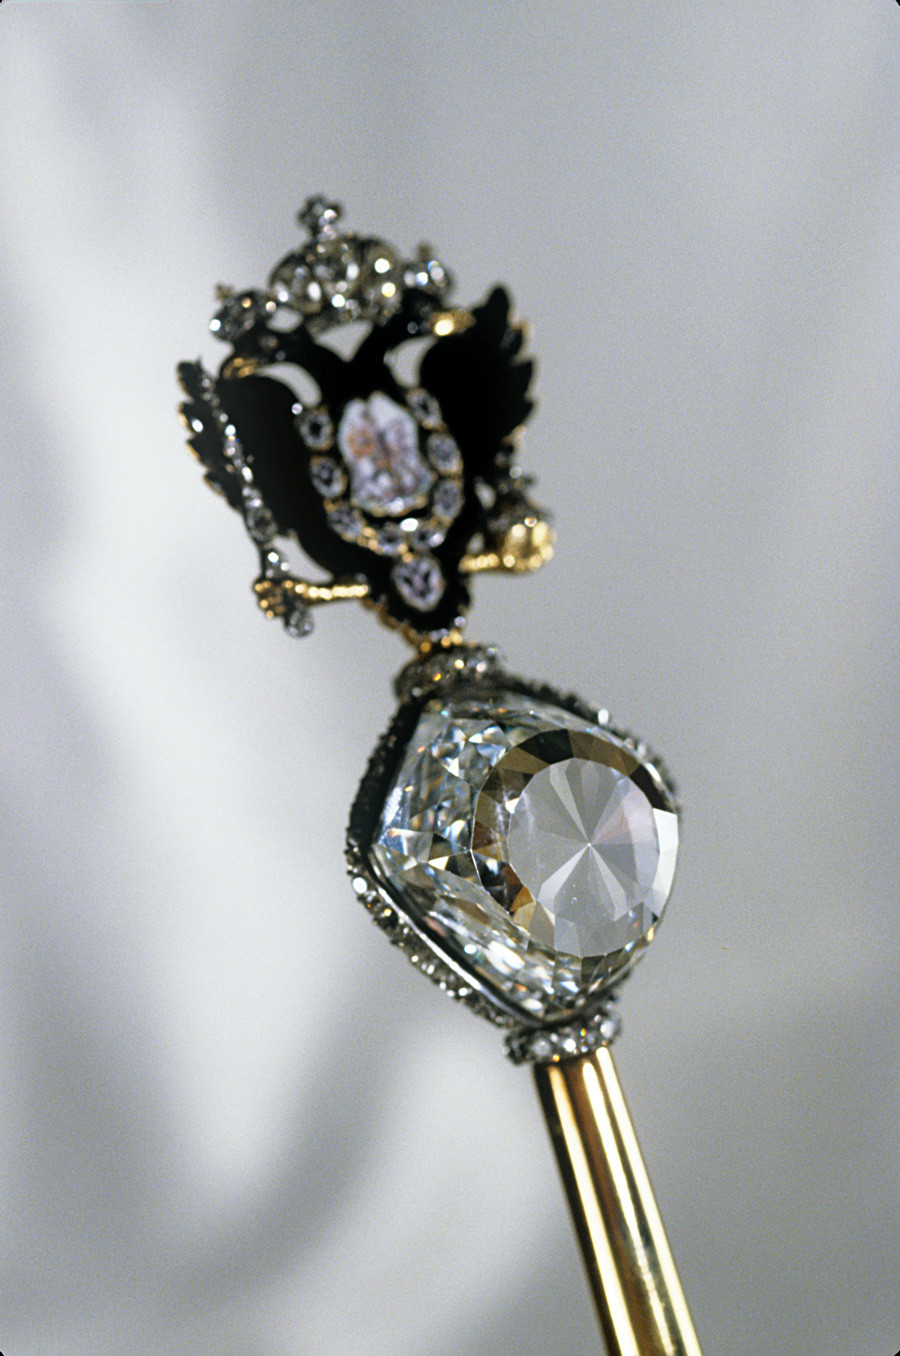 The Russian Imperial scepter. The RF Diamond Fund.